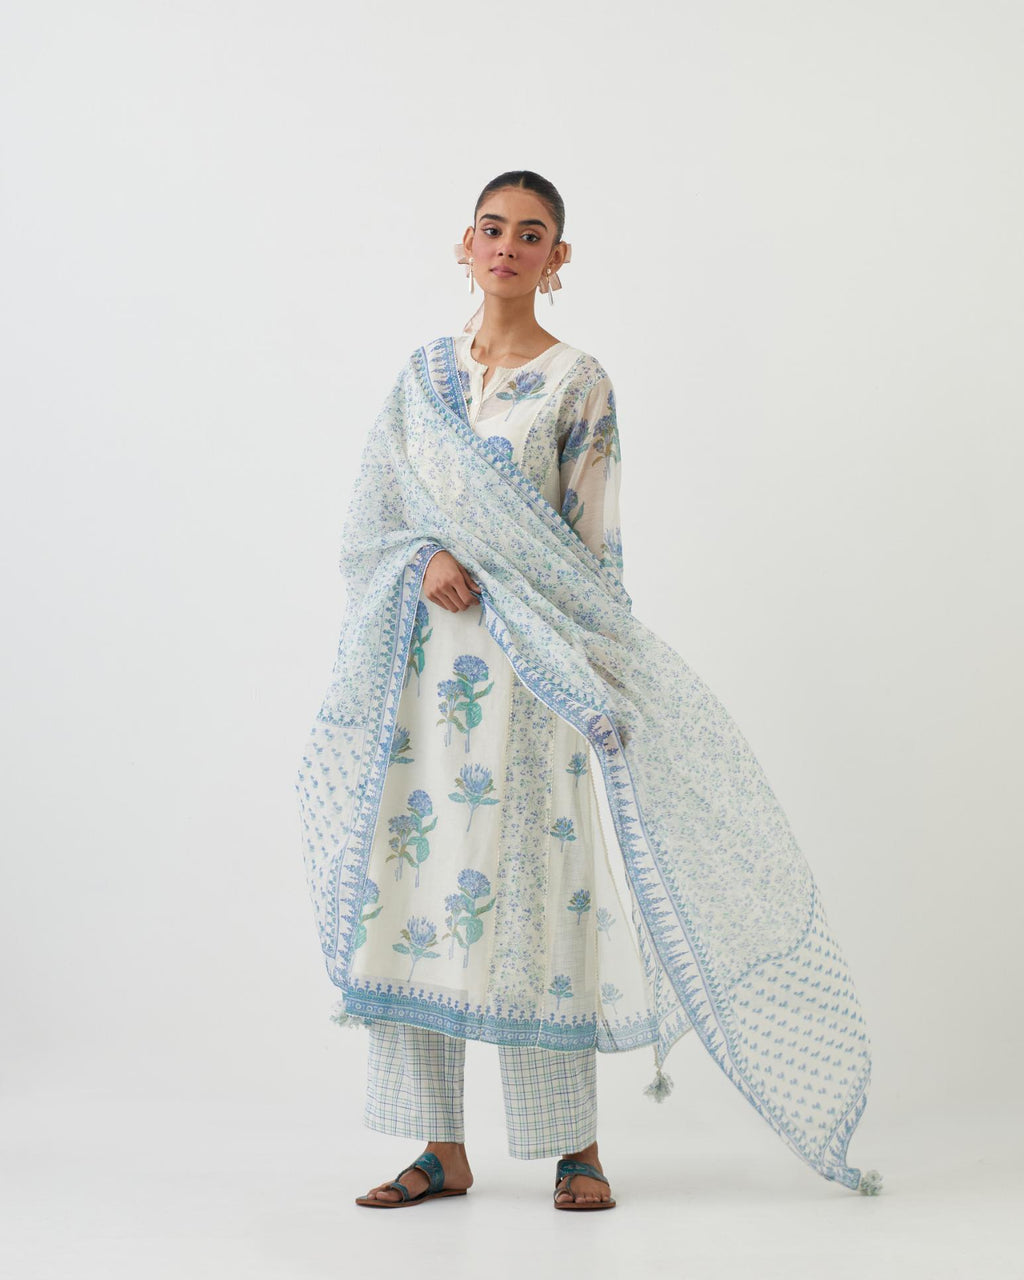 Off white cotton chanderi hand-block printed kurta set with multi-print panels, highlighted with off white ricrac.